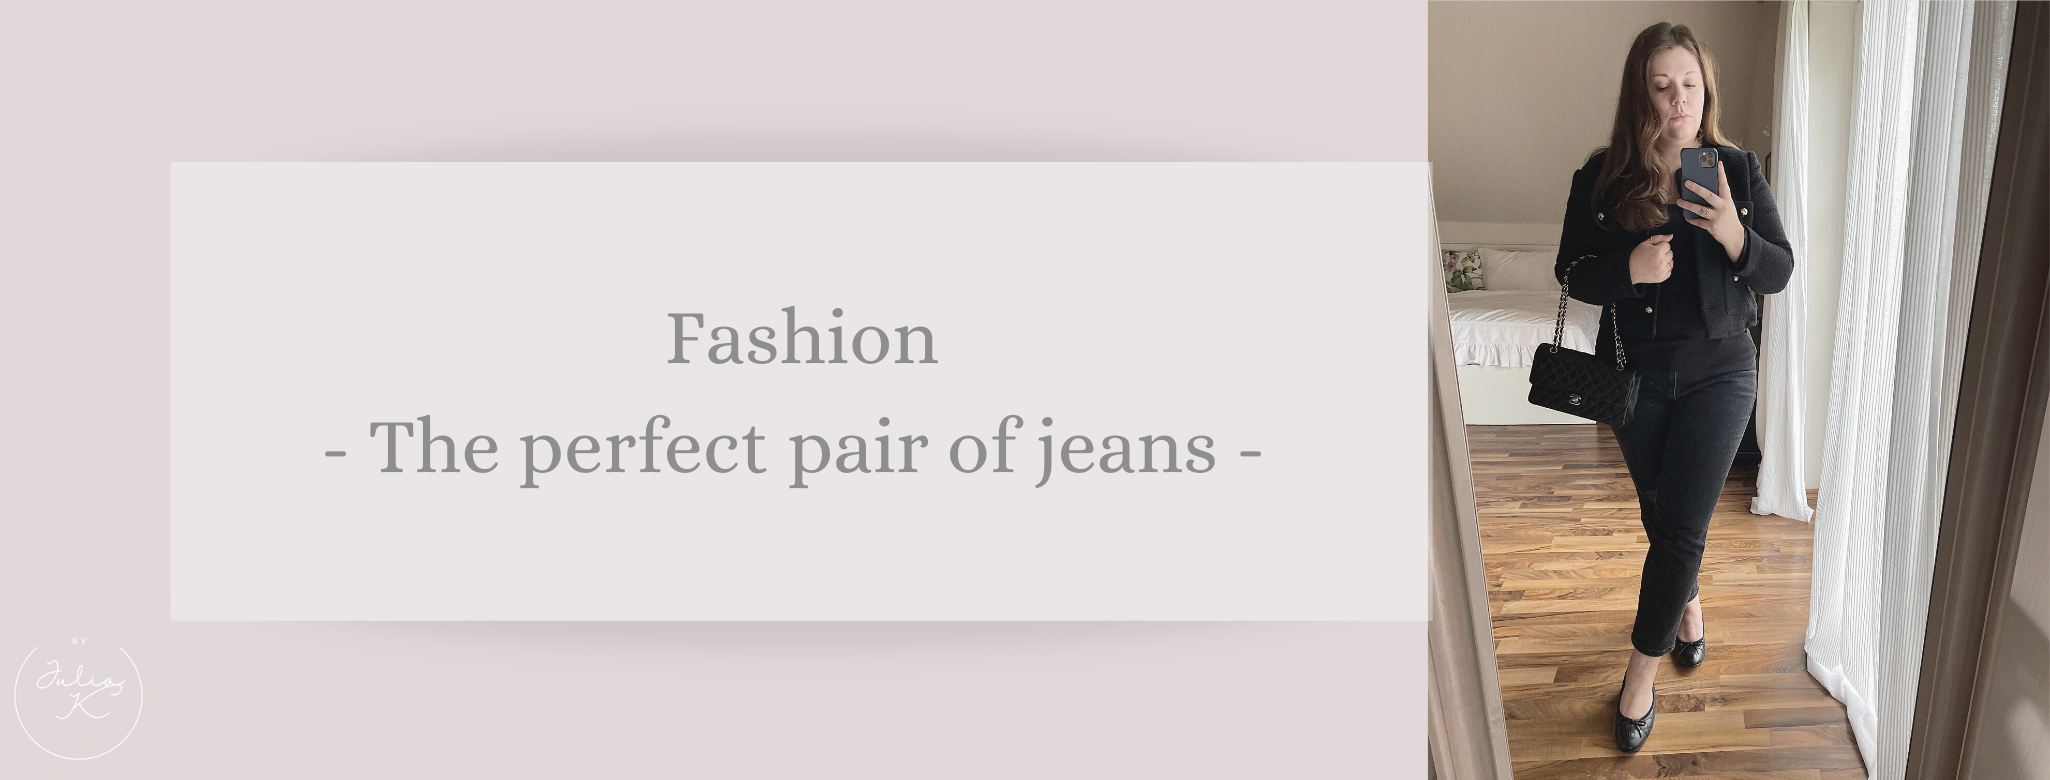 Fashion: Perfect pair of jeans